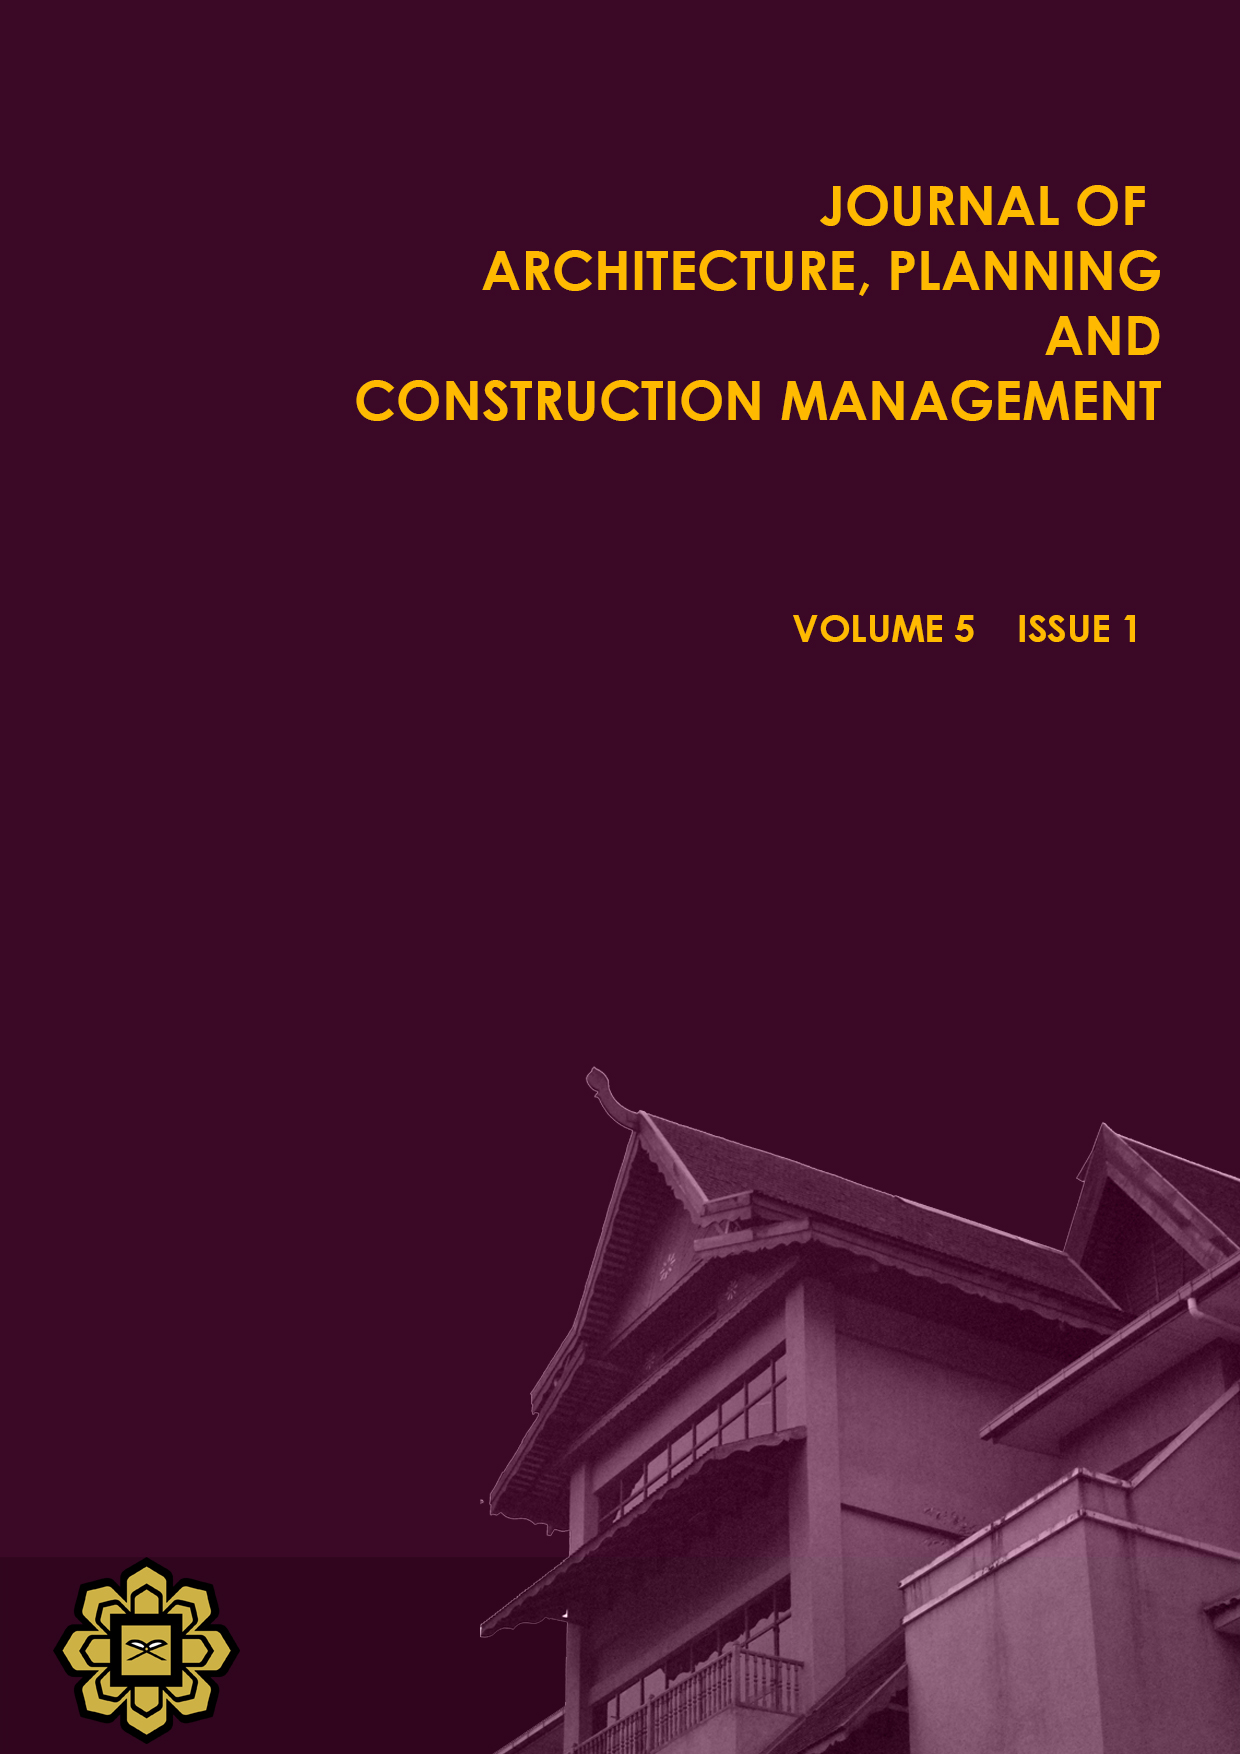 					View Vol. 6 No. 2 (2016): Journal of Architecture, Planning and Construction Management (JAPCM)
				